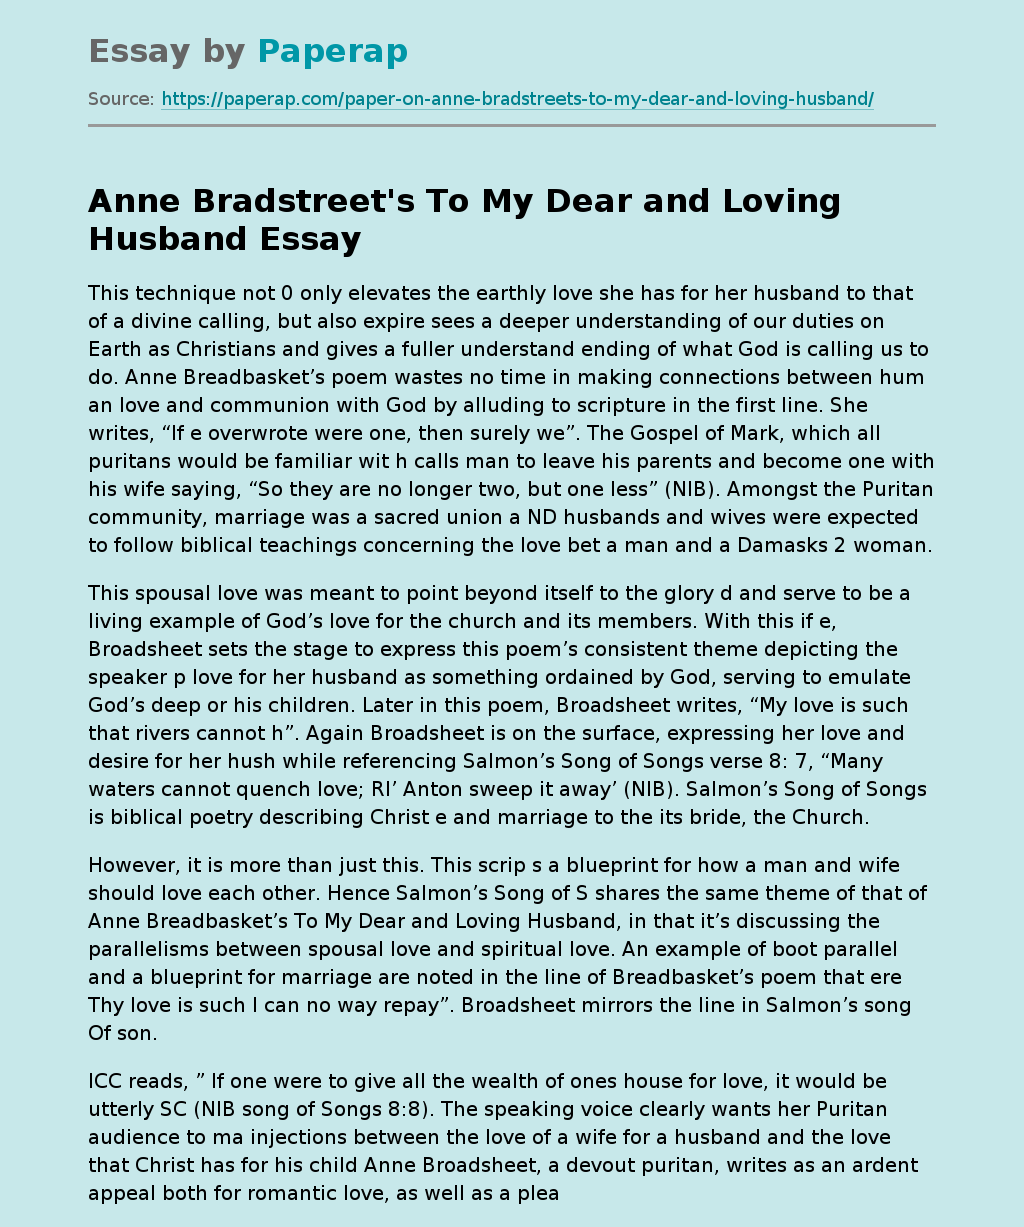 Anne Bradstreet's To My Dear and Loving Husband